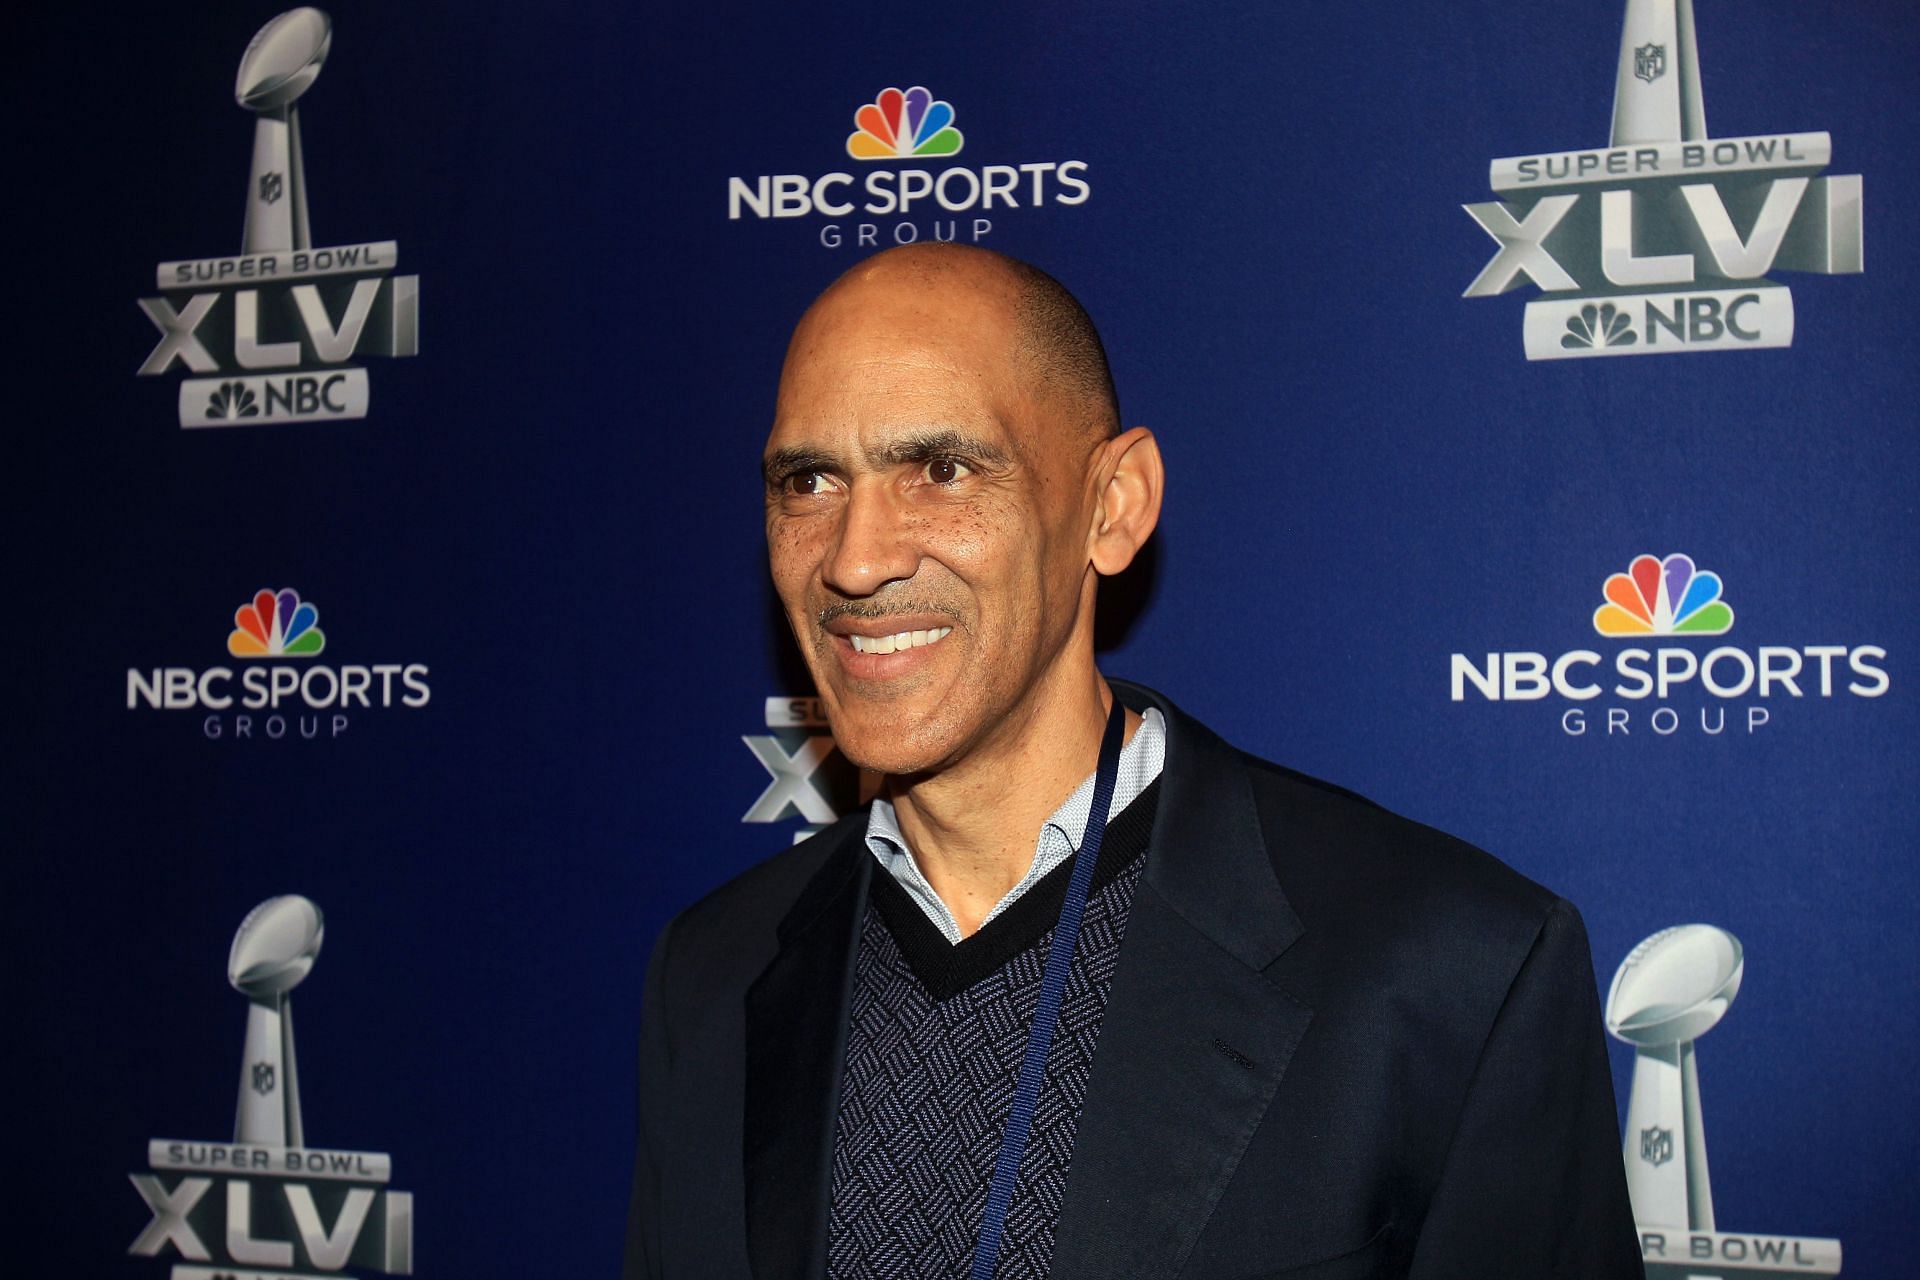 NFL Hall of Fame Coach Tony Dungy